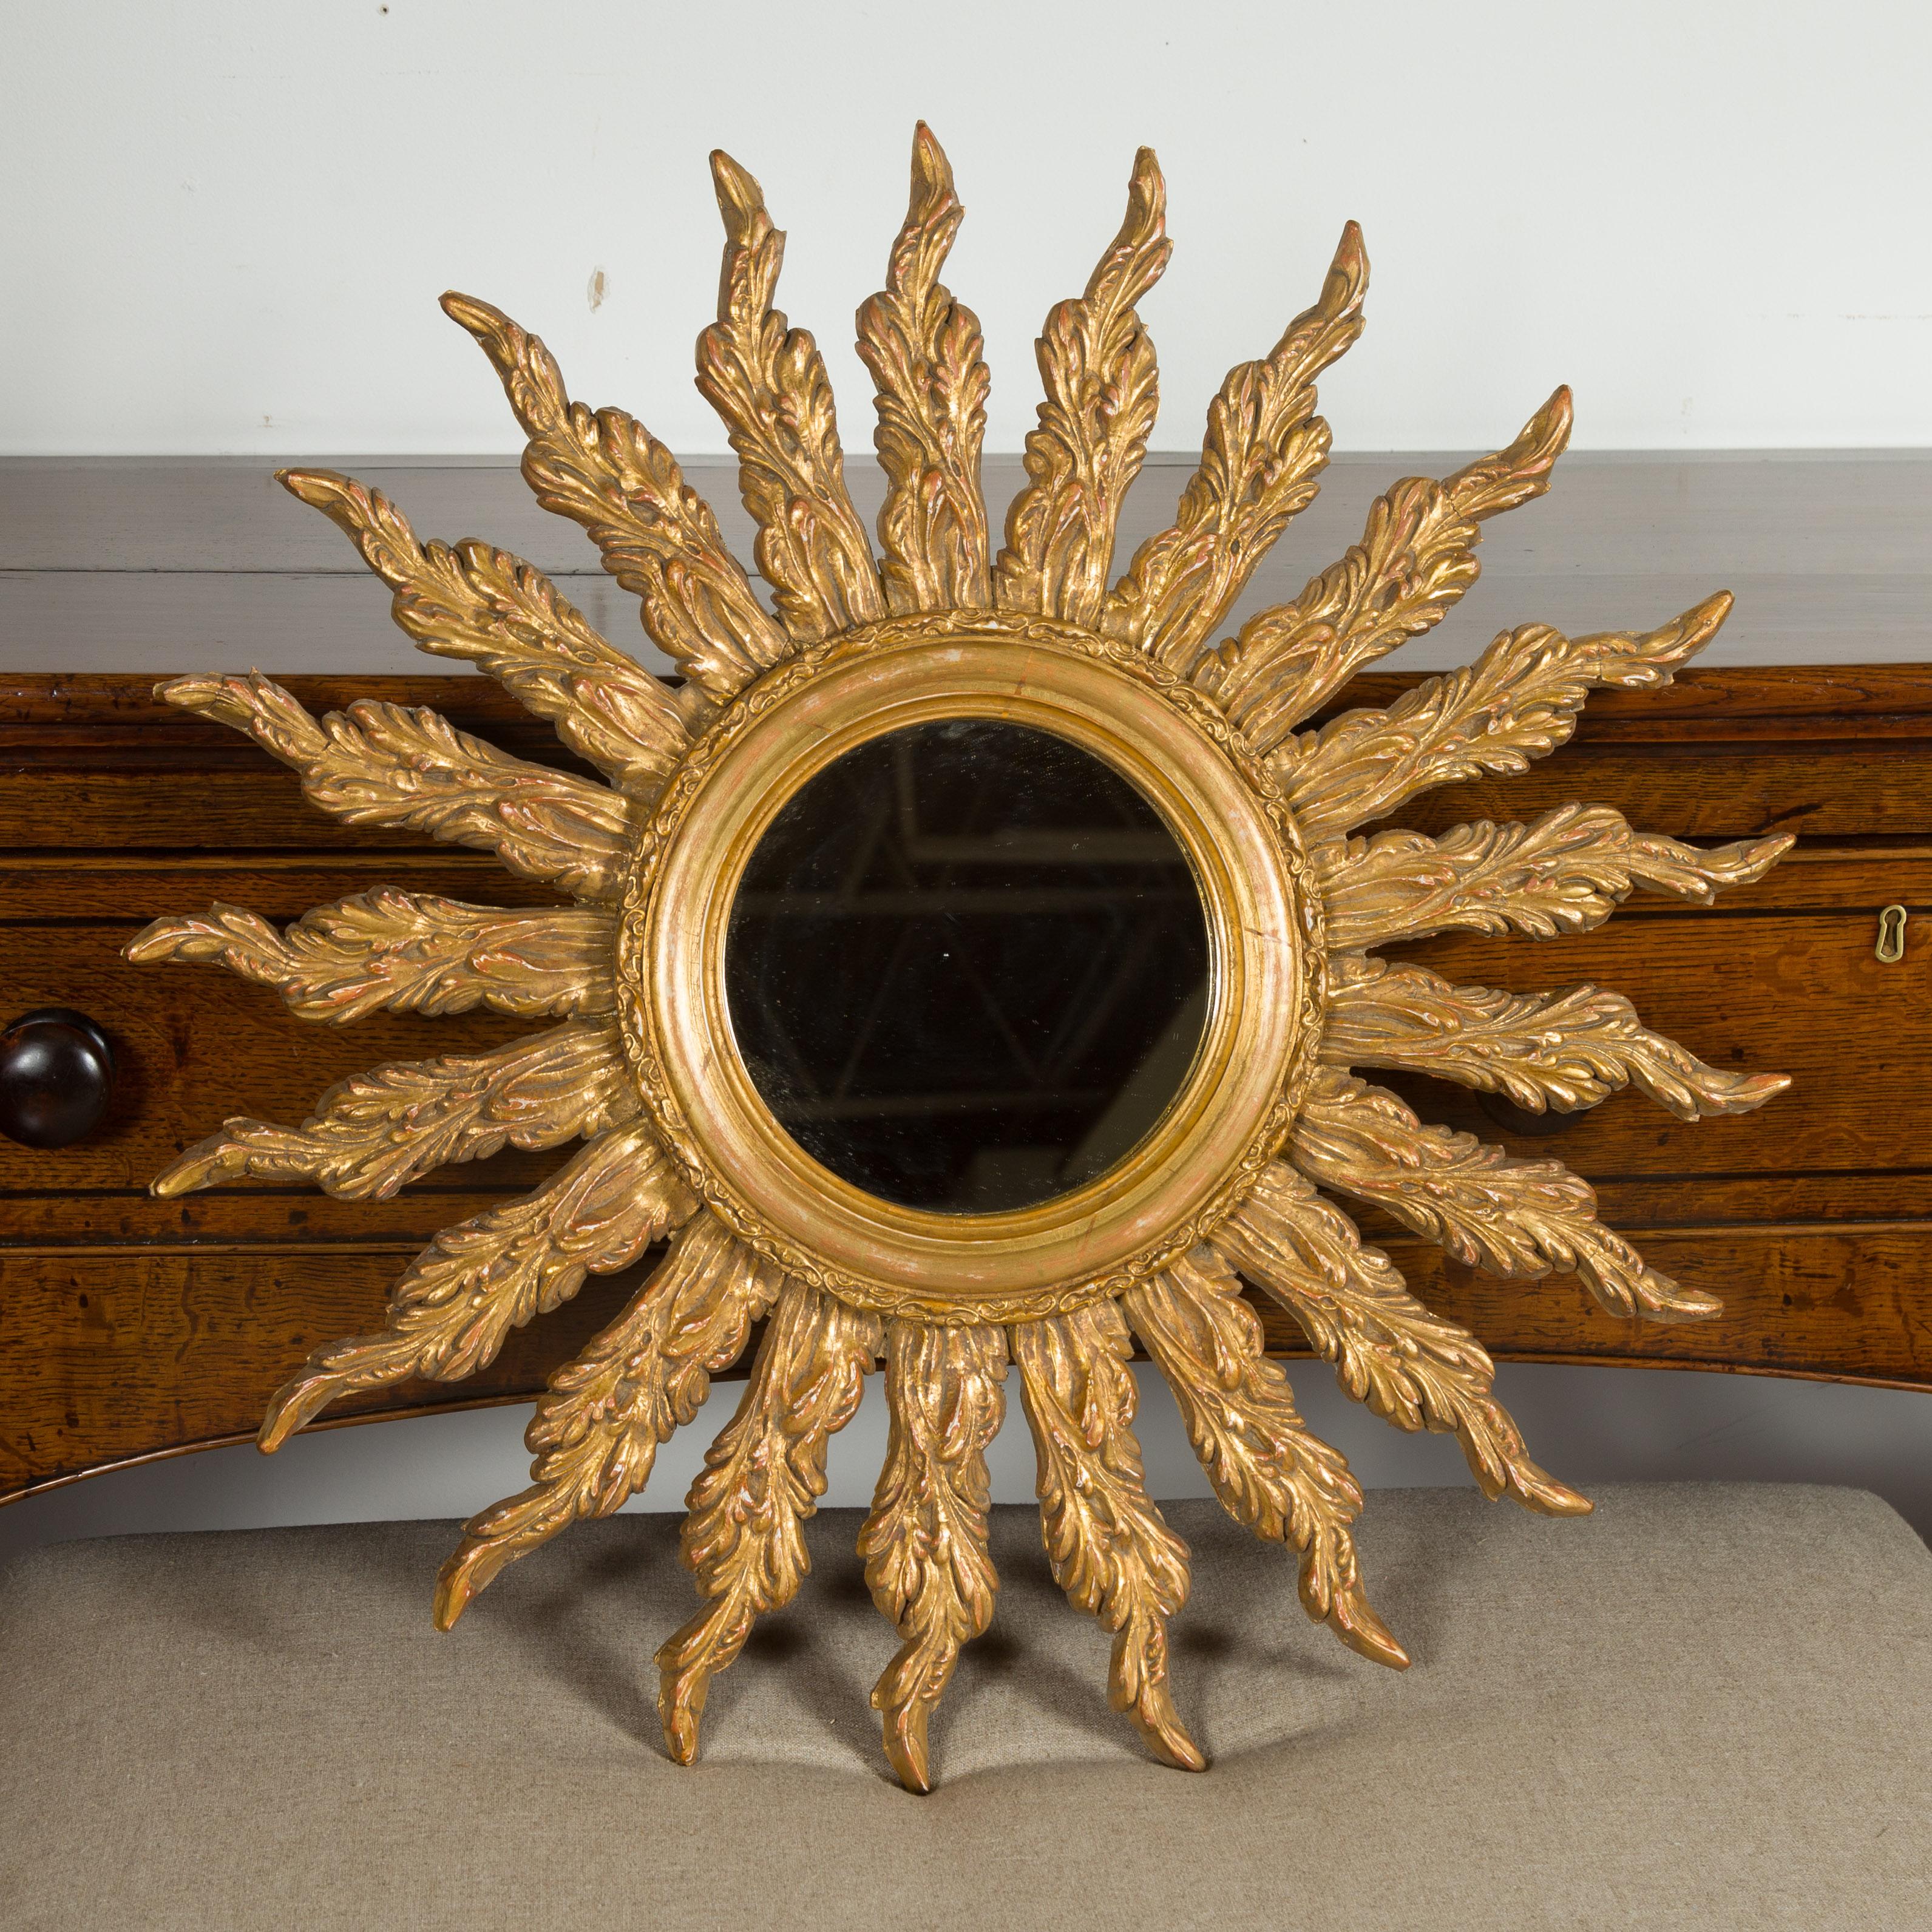 A French giltwood sunburst mirror from the mid-20th century, with wavy sunrays. Created in France during the midcentury period, this vintage piece features a round mirror plate framed by a carved giltwood molding. On the surround, a decor of wavy